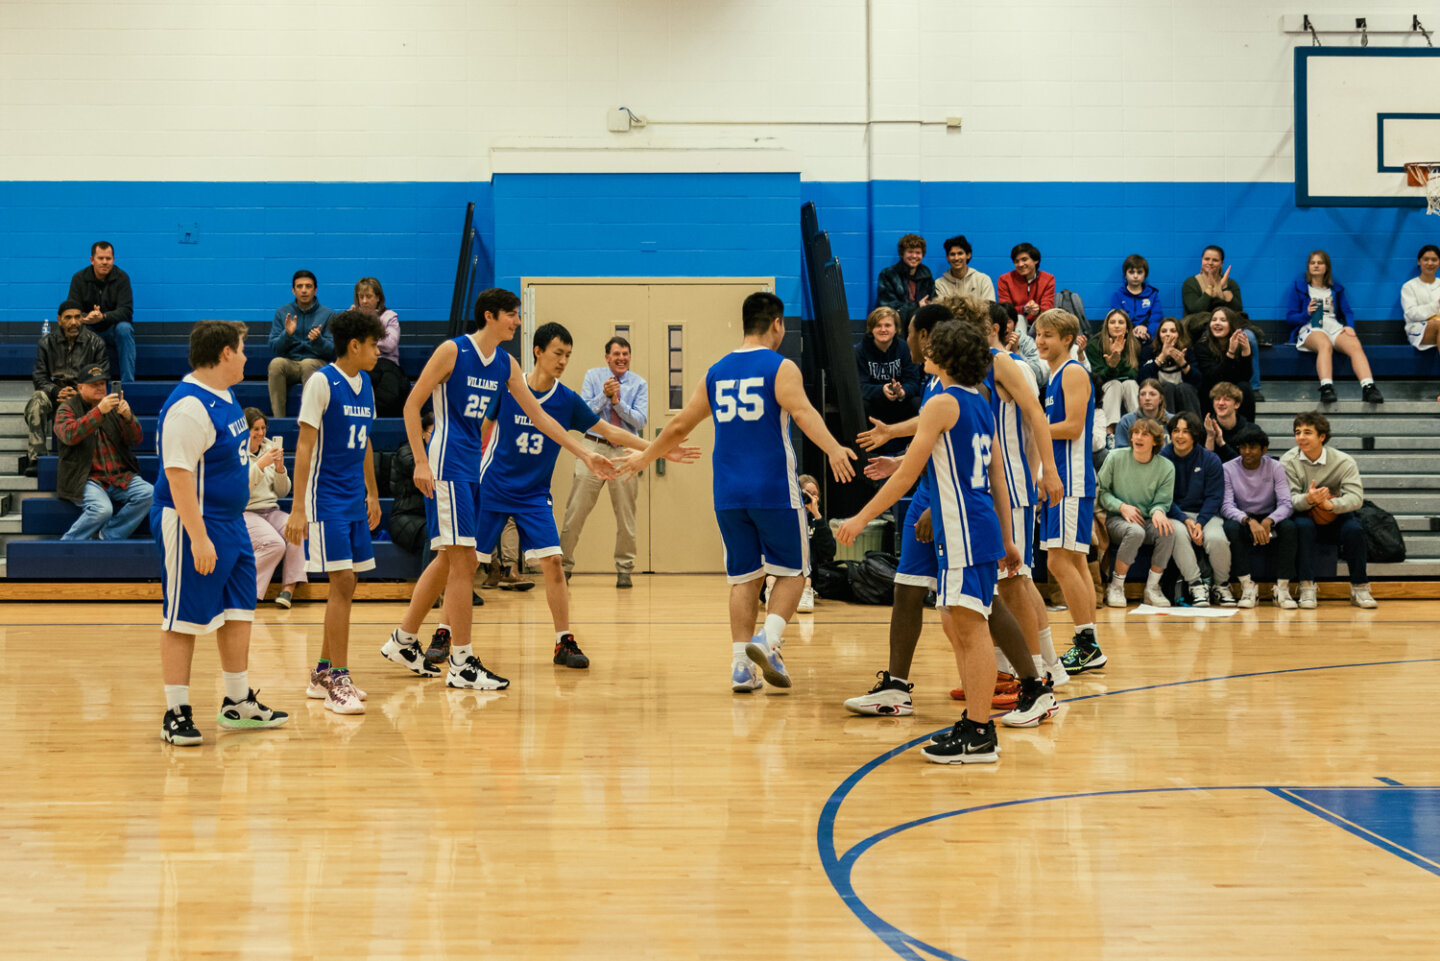 Boys basketball team cheers on player as they exit the court